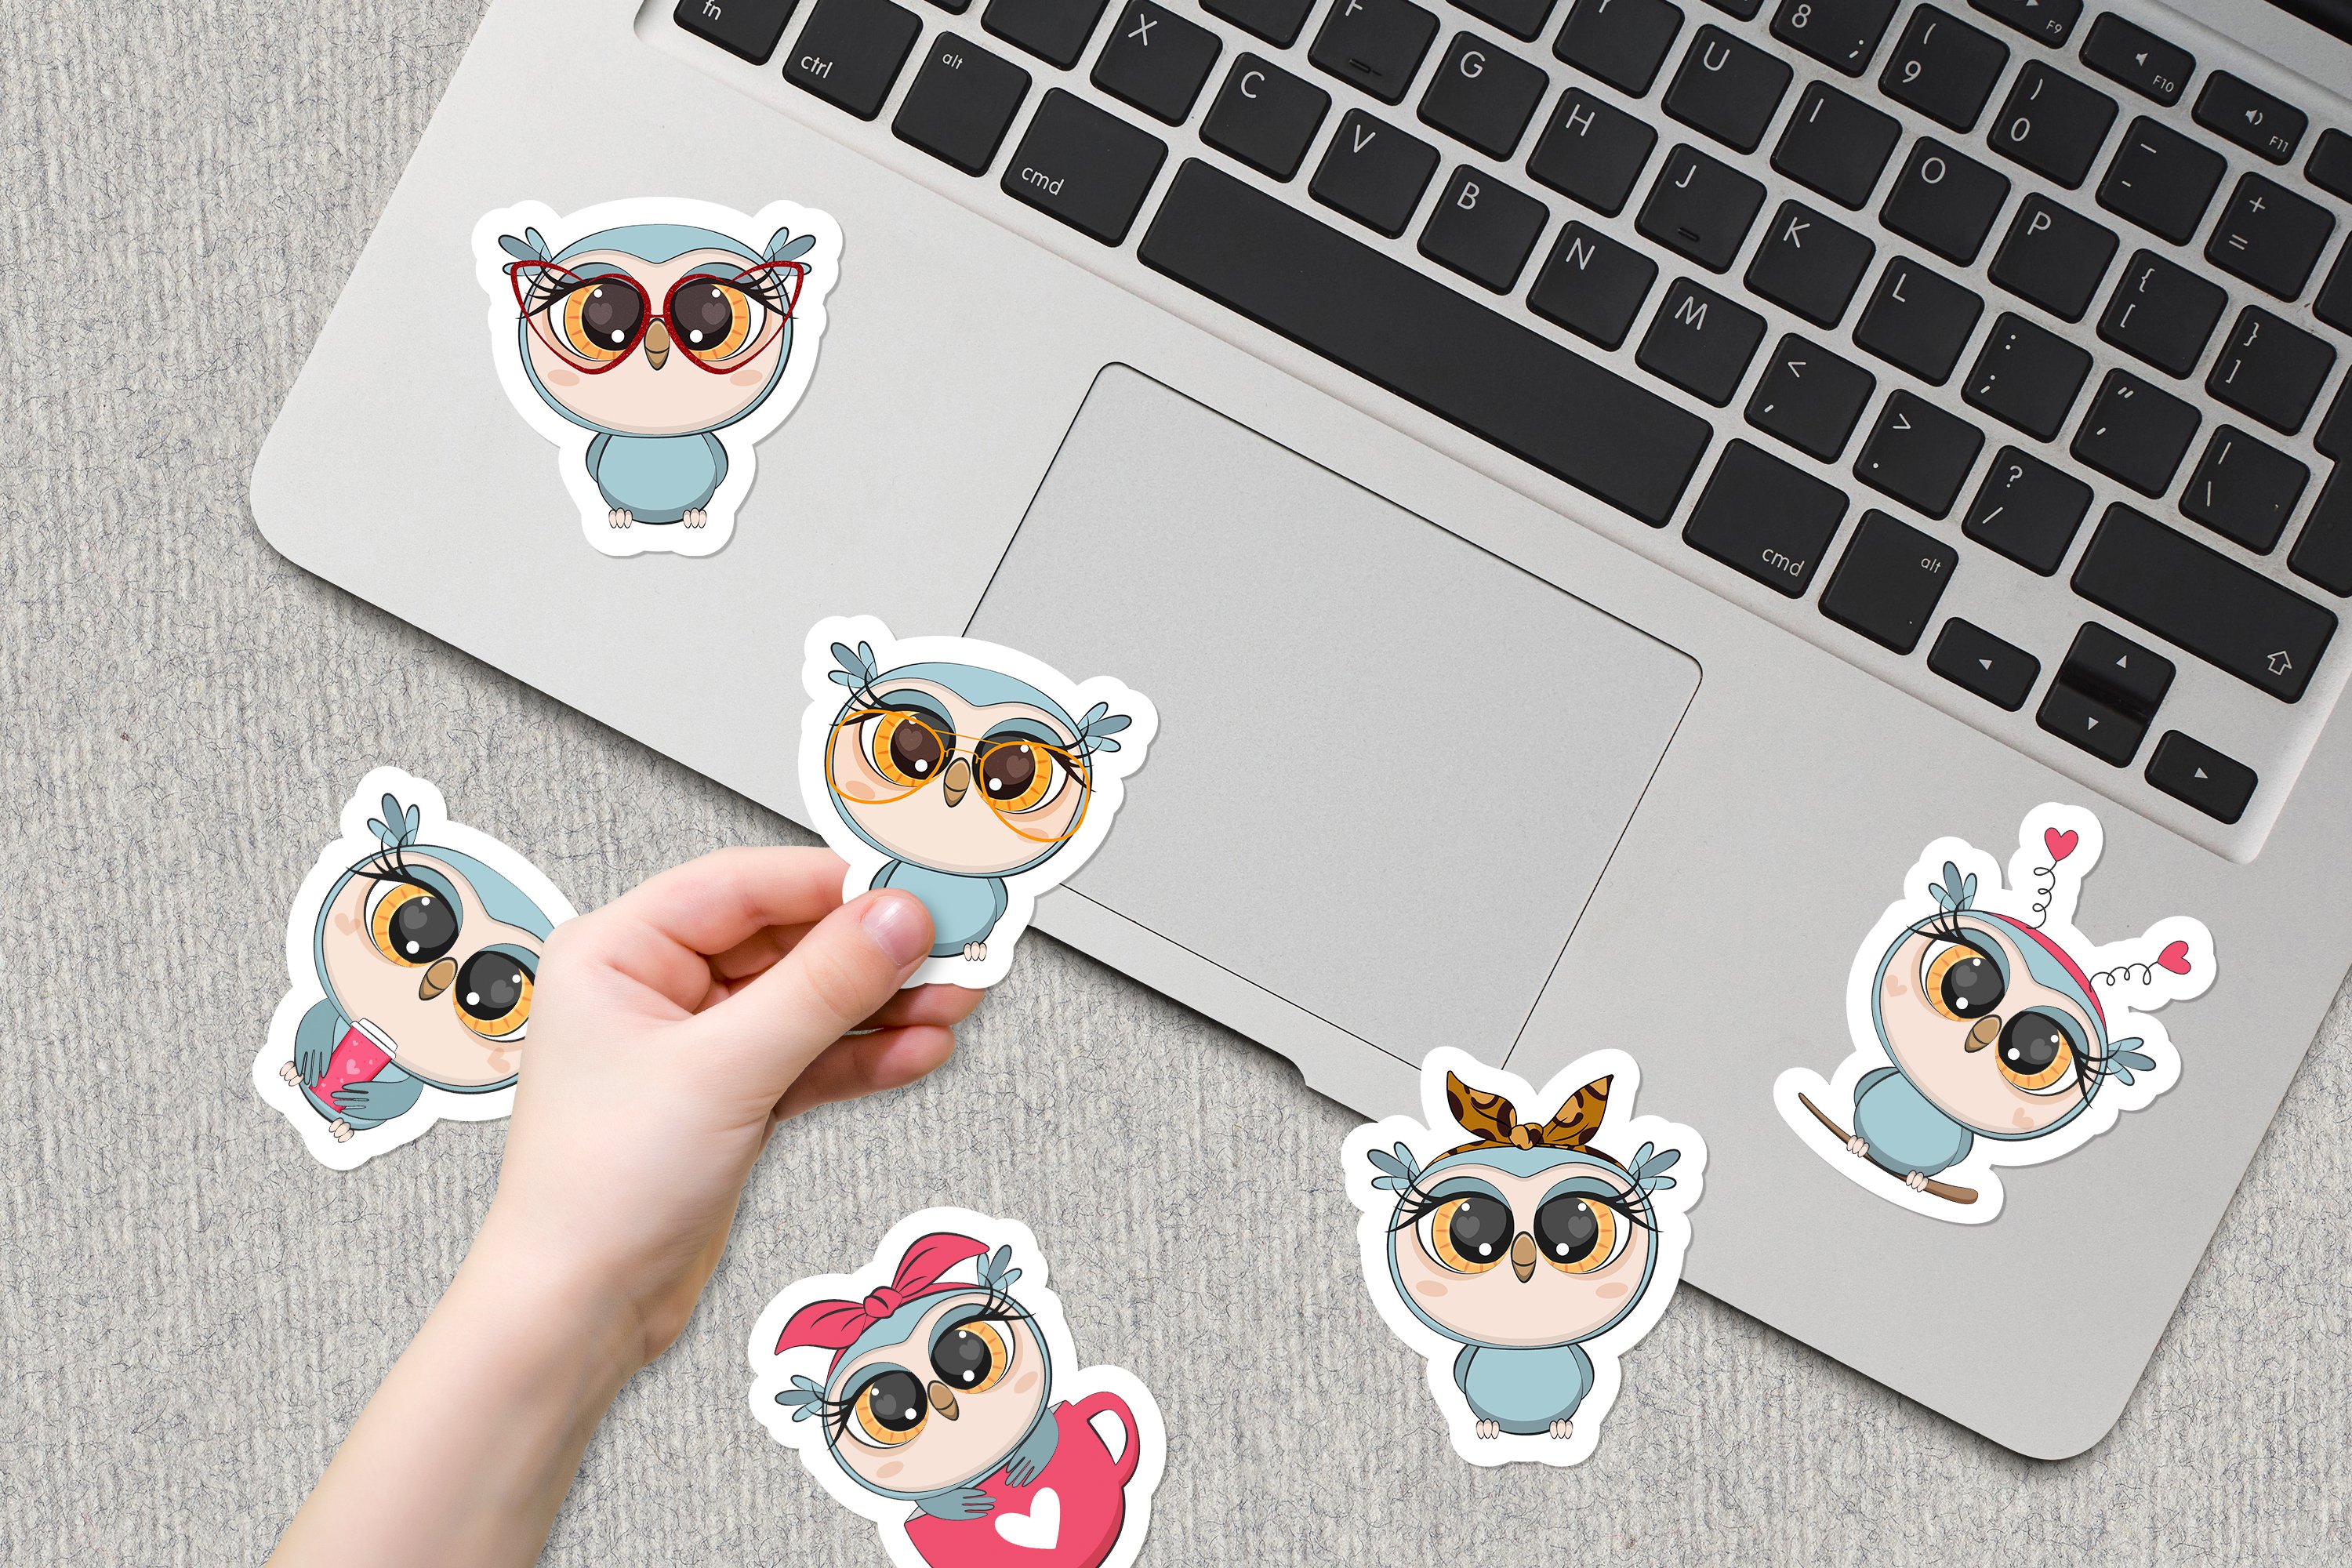 Images of owls on stickers.